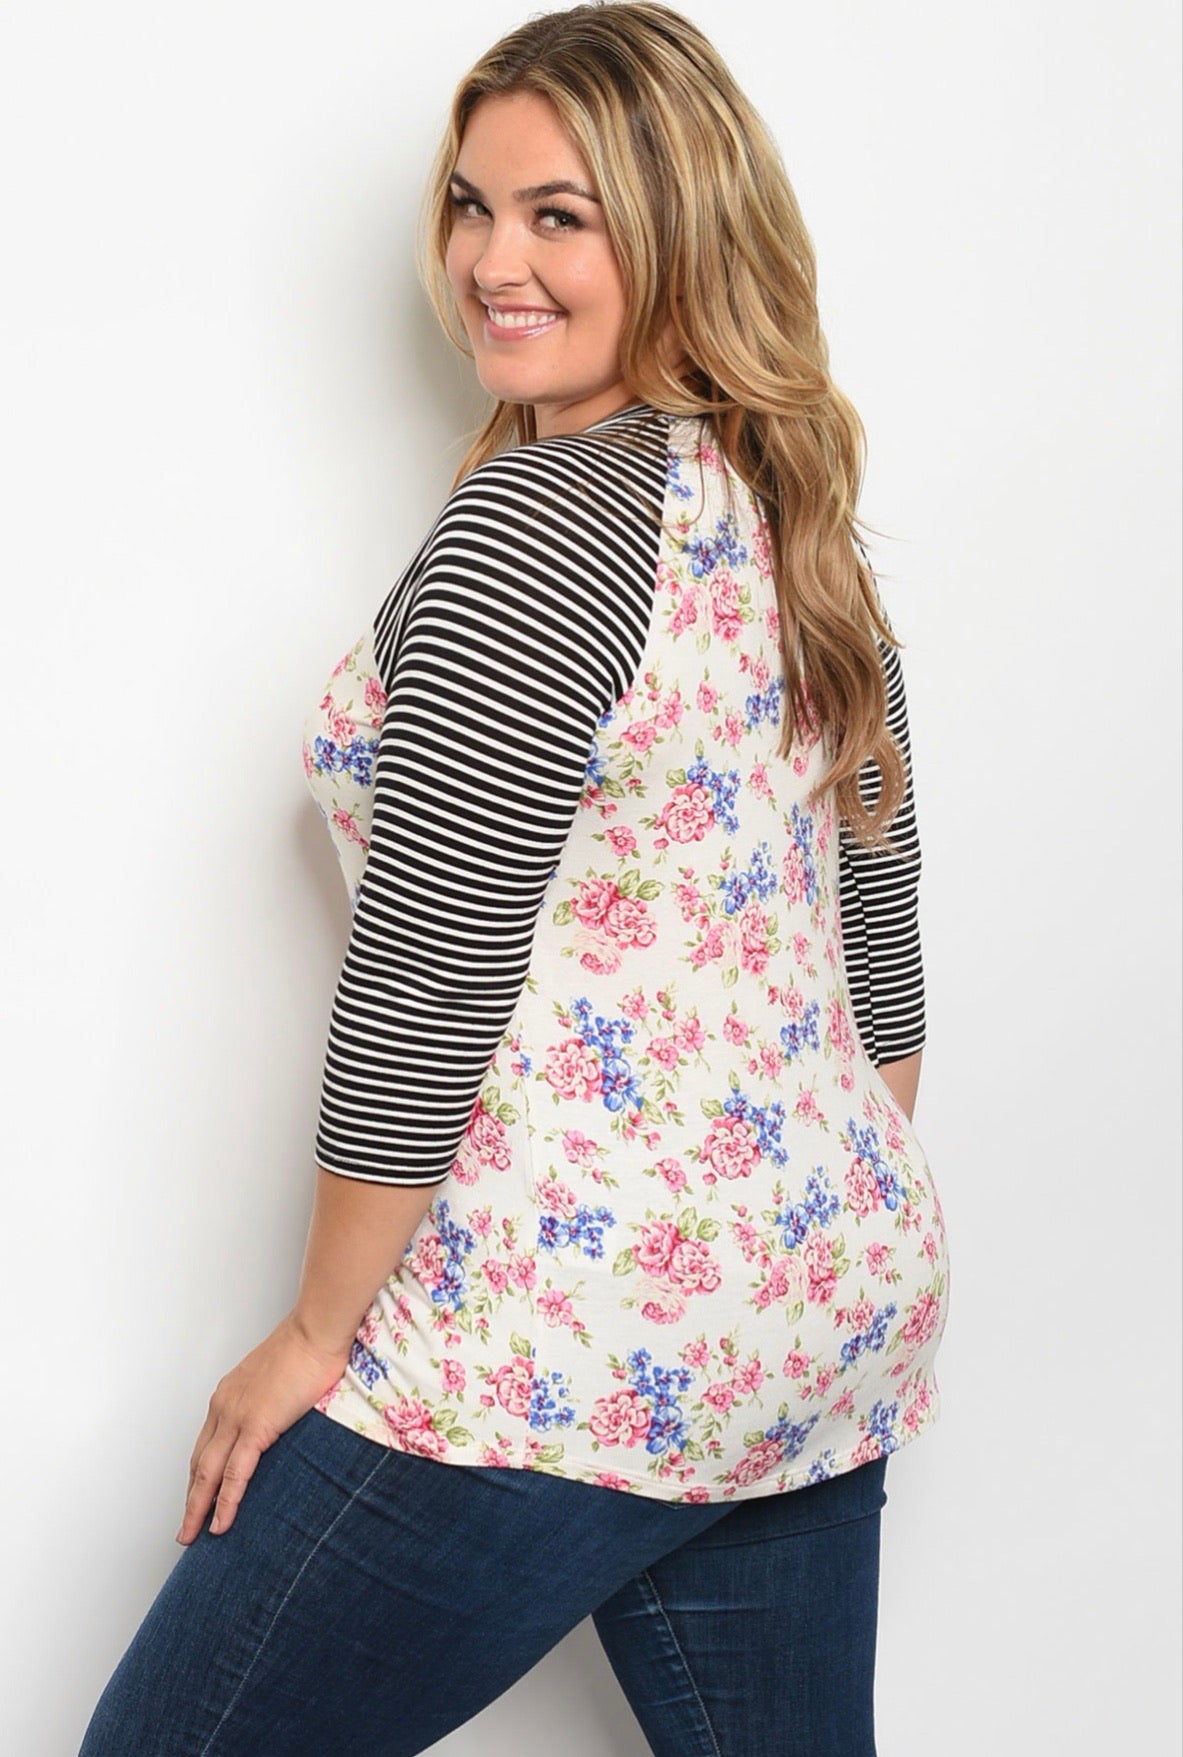 Ivory Striped Floral Baseball Tee